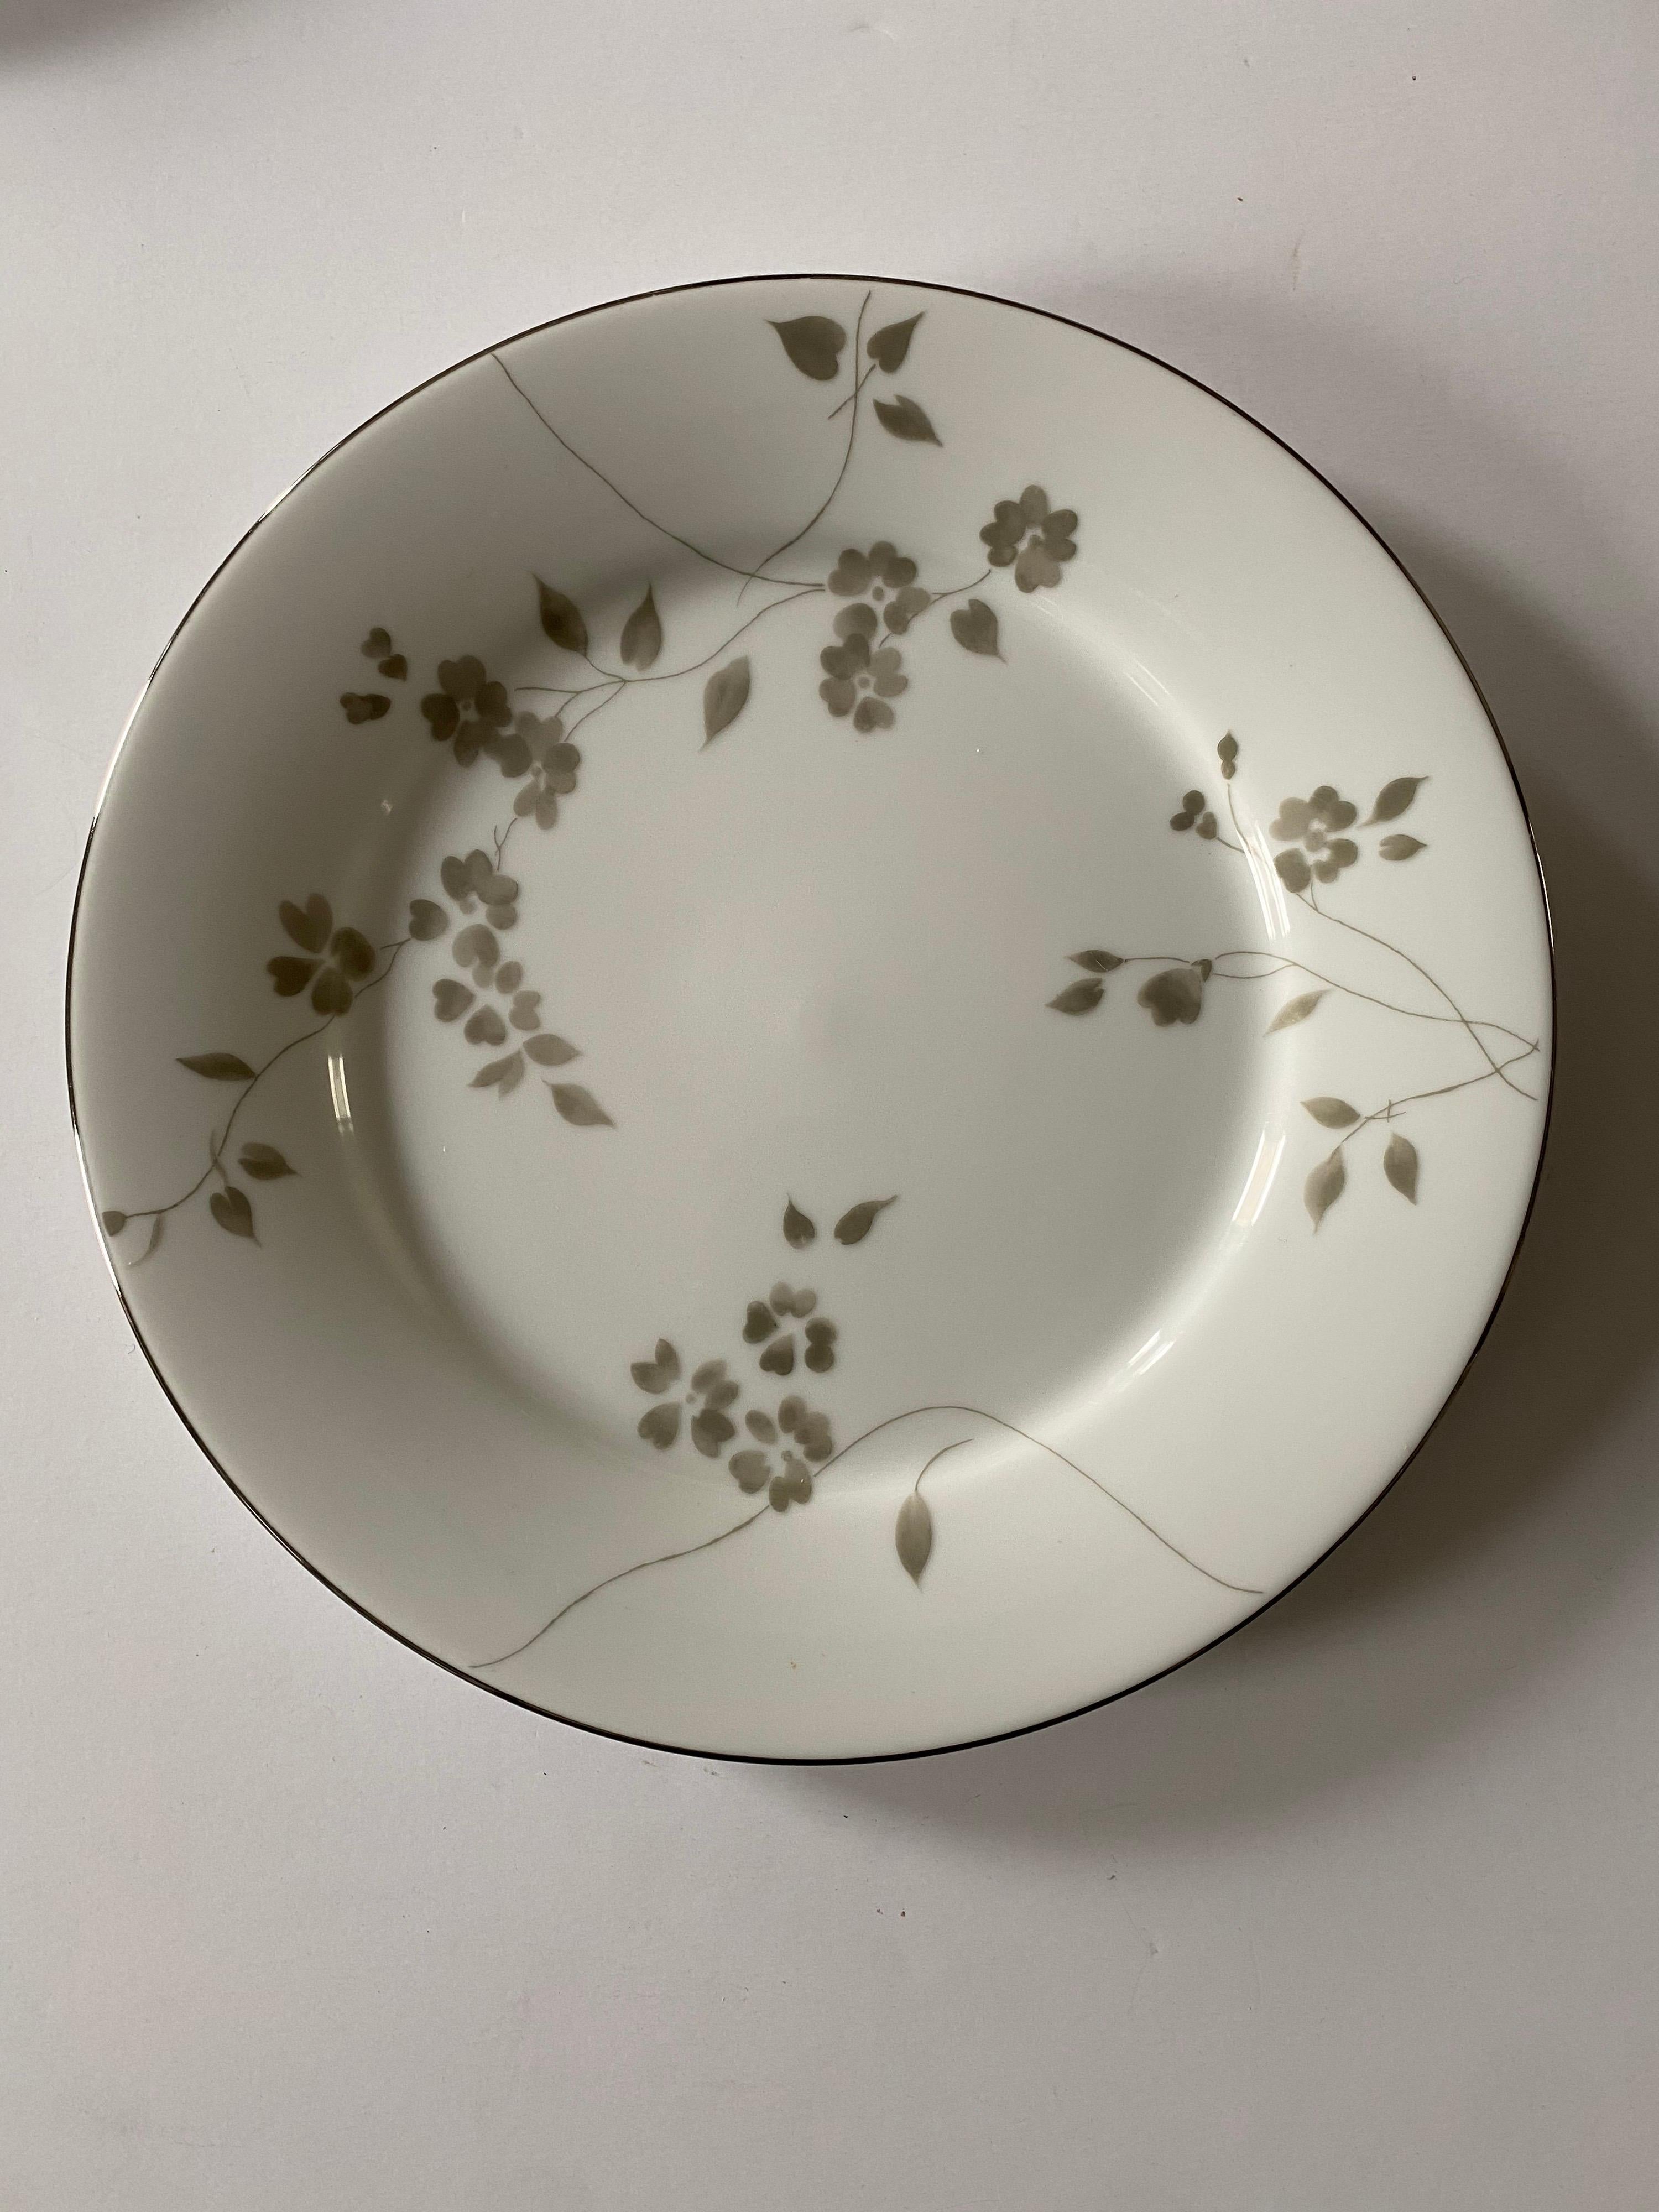 A 12 piece set of dinnerware by Ralph Lauren Home in the Sophia floral pattern, a Romantic pattern of gray/pale green scattered flowers on white, complemented by platinum trim. 

Includes the following 12 (twelve) pieces:
4 Dinner plates, 10-3/4